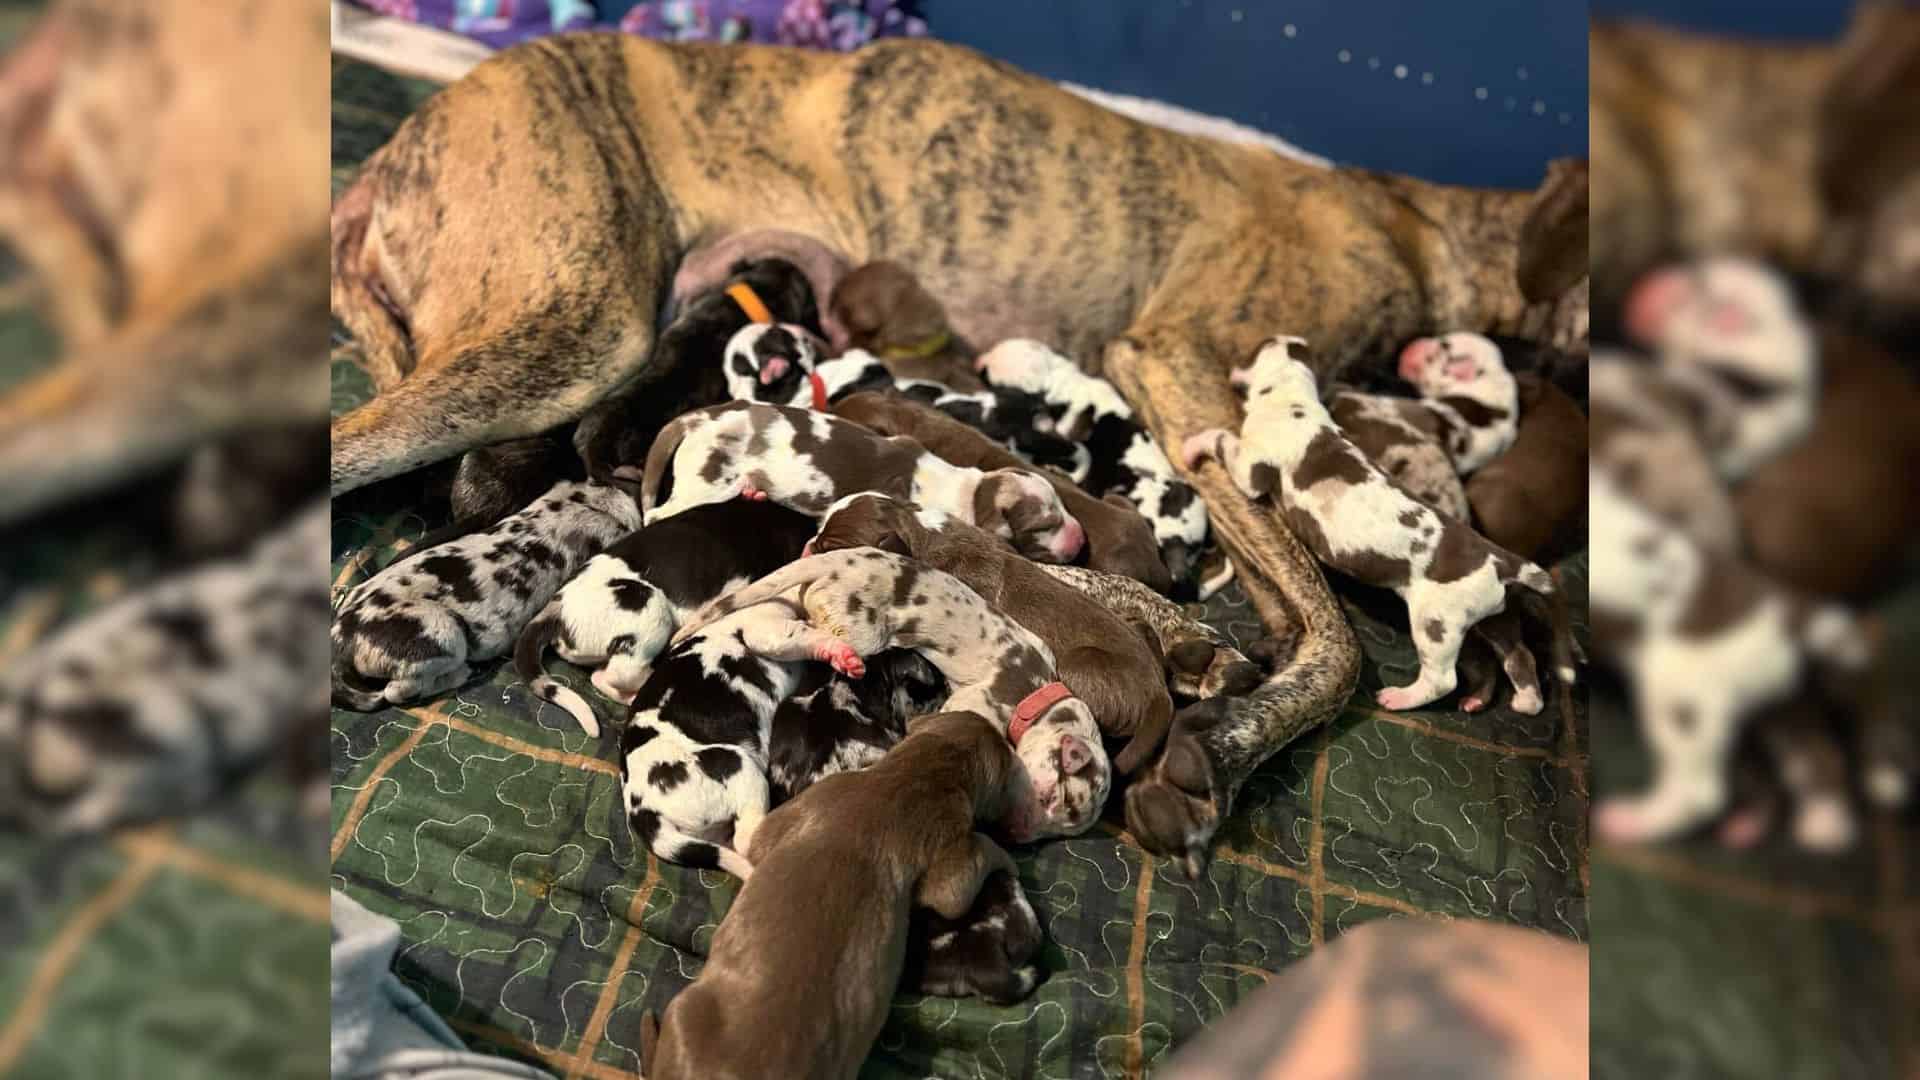 Amazing Great Dane Momma Gives Birth To One Of The Largest Litters You’ve Ever Seen